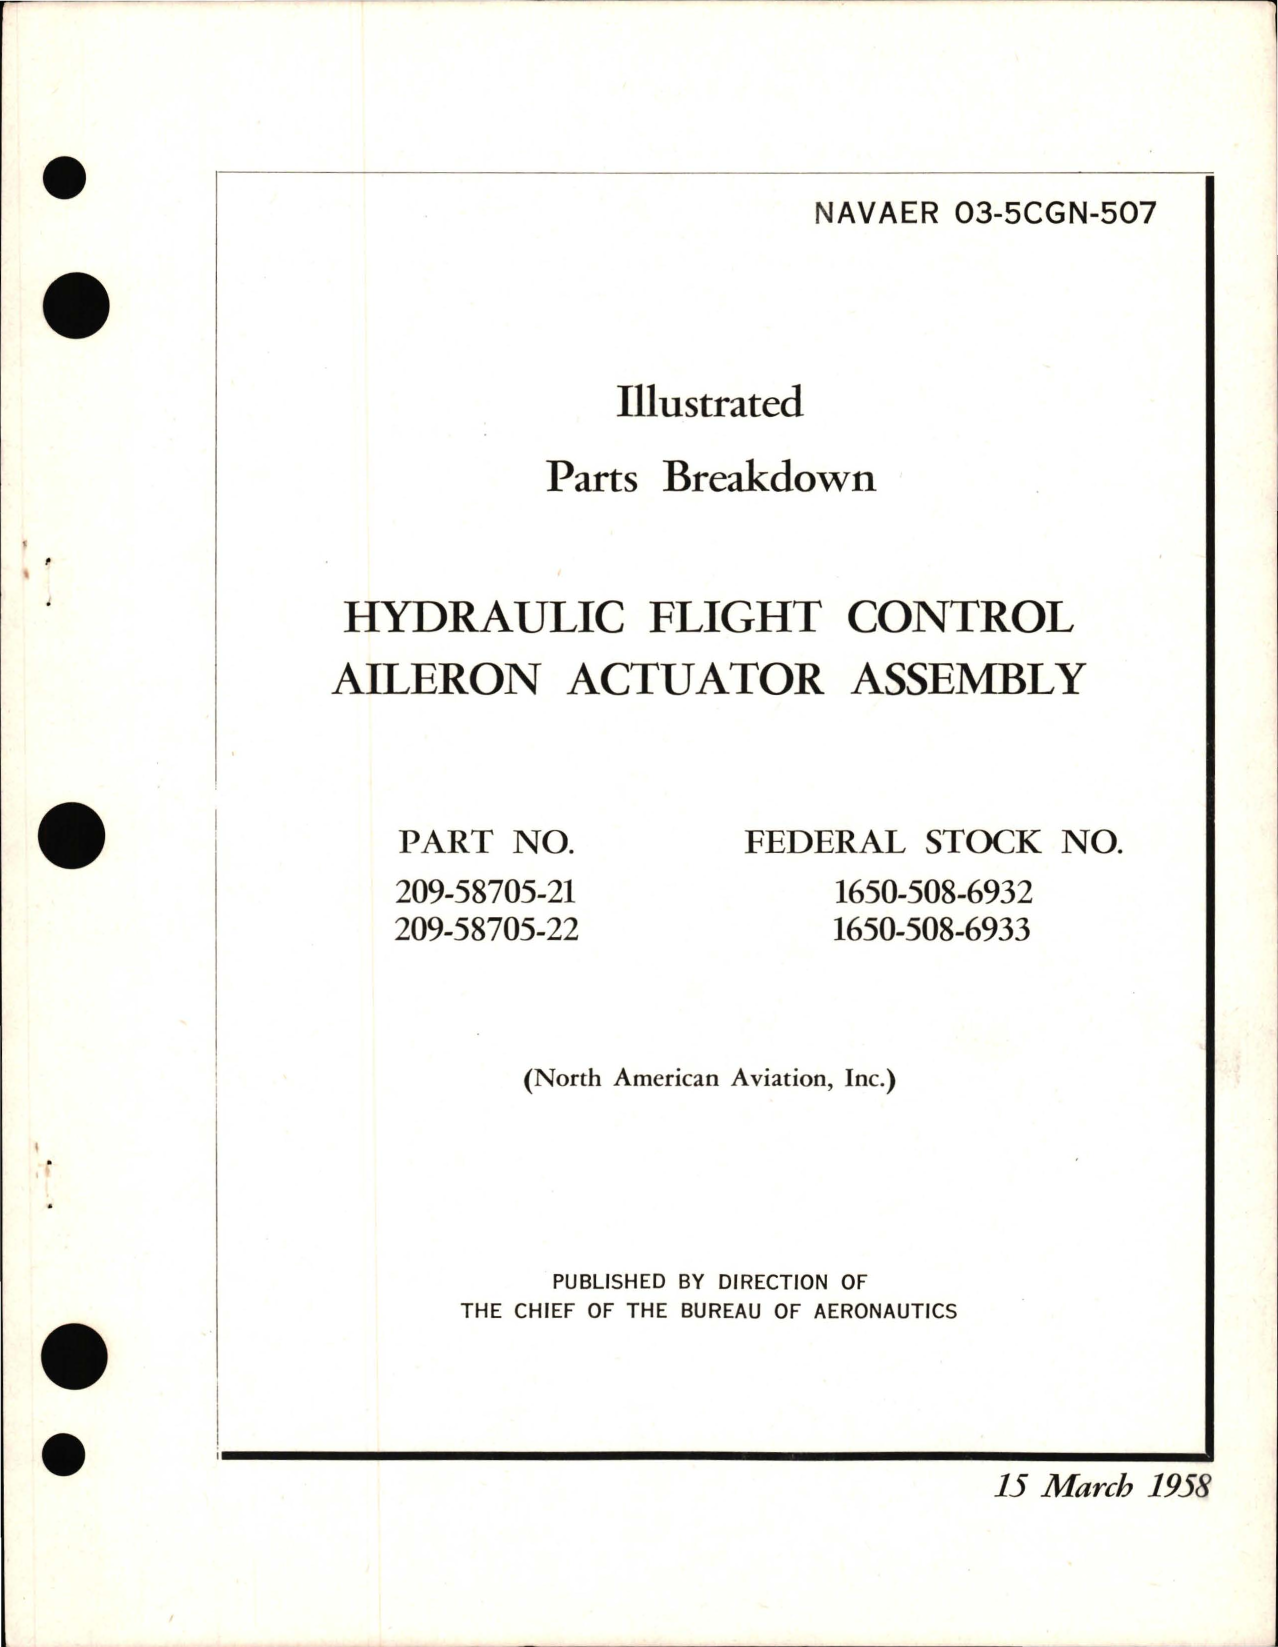 Sample page 1 from AirCorps Library document: Parts Breakdown for Hydraulic Flight Control Aileron Actuator Assembly - Parts 209-58705-21 and 209-58705-22 